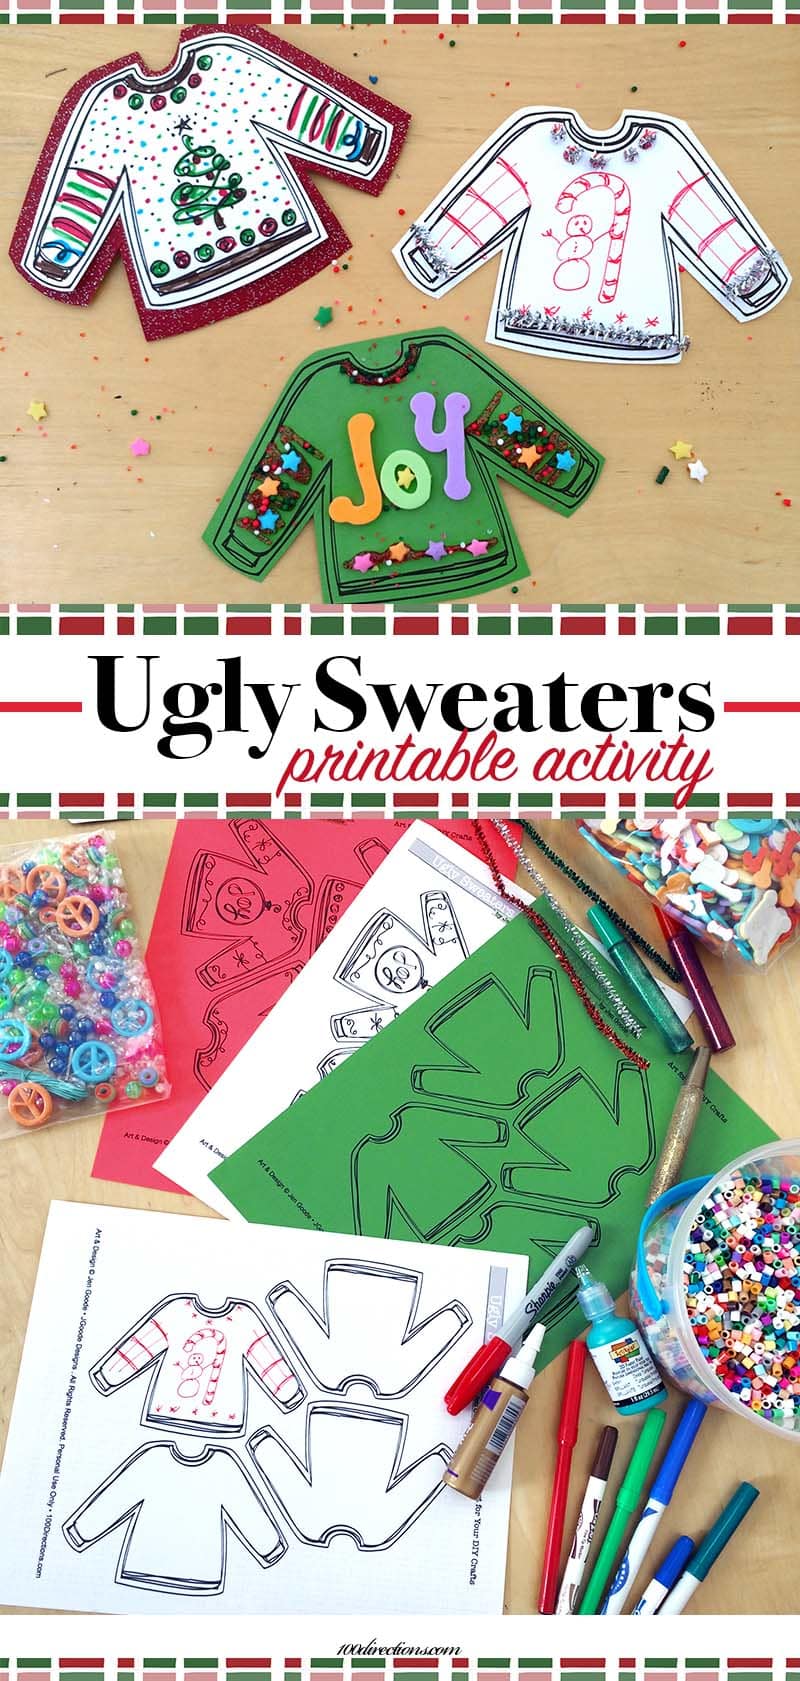 Make cute Ugly Sweaters - printable craft activity for your Ugly Sweater party